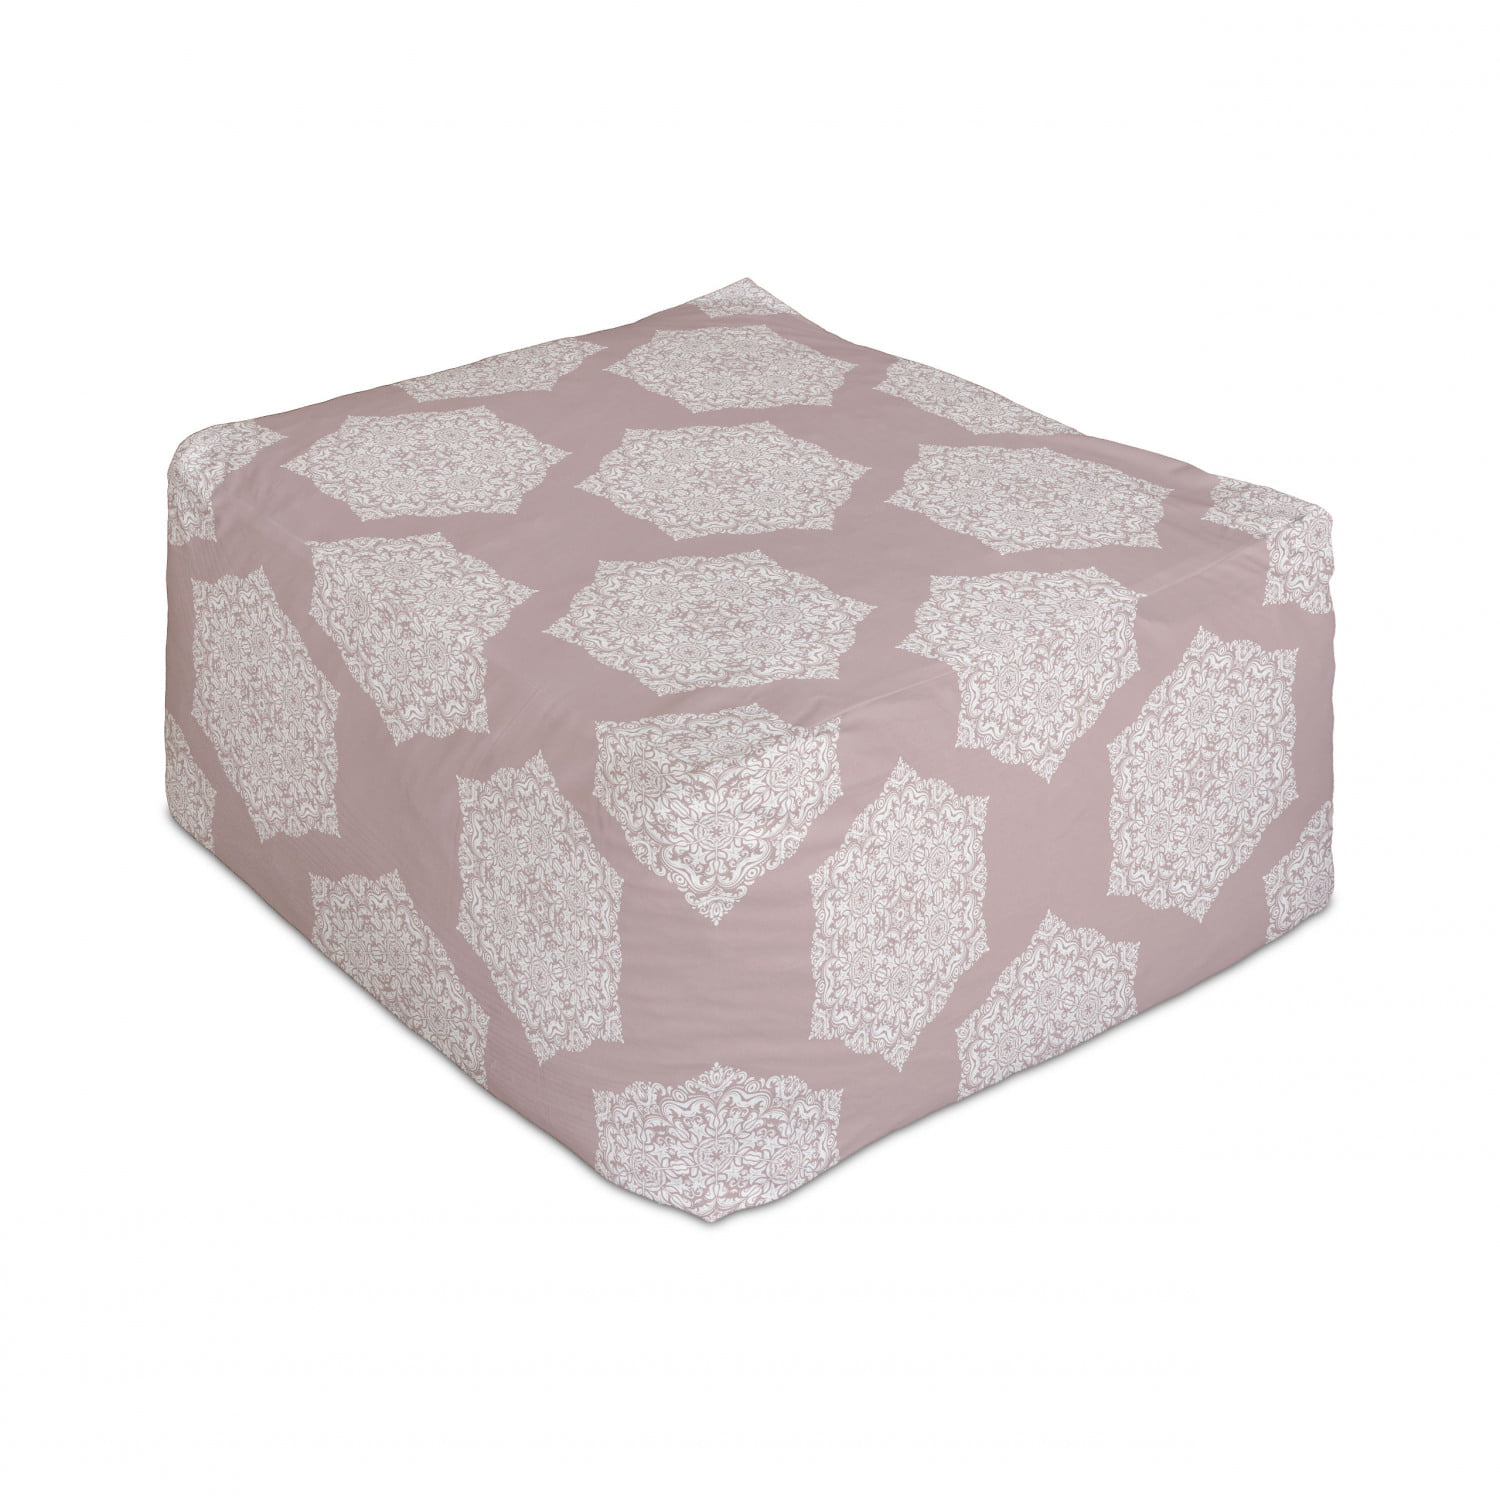 25 Under Desk Foot Stool for Living Room Office Ottoman with Cover Inspired Modernized Damask Pastel Colors Illustration Cream Pale Salmon Ambesonne Floral Rectangle Pouf